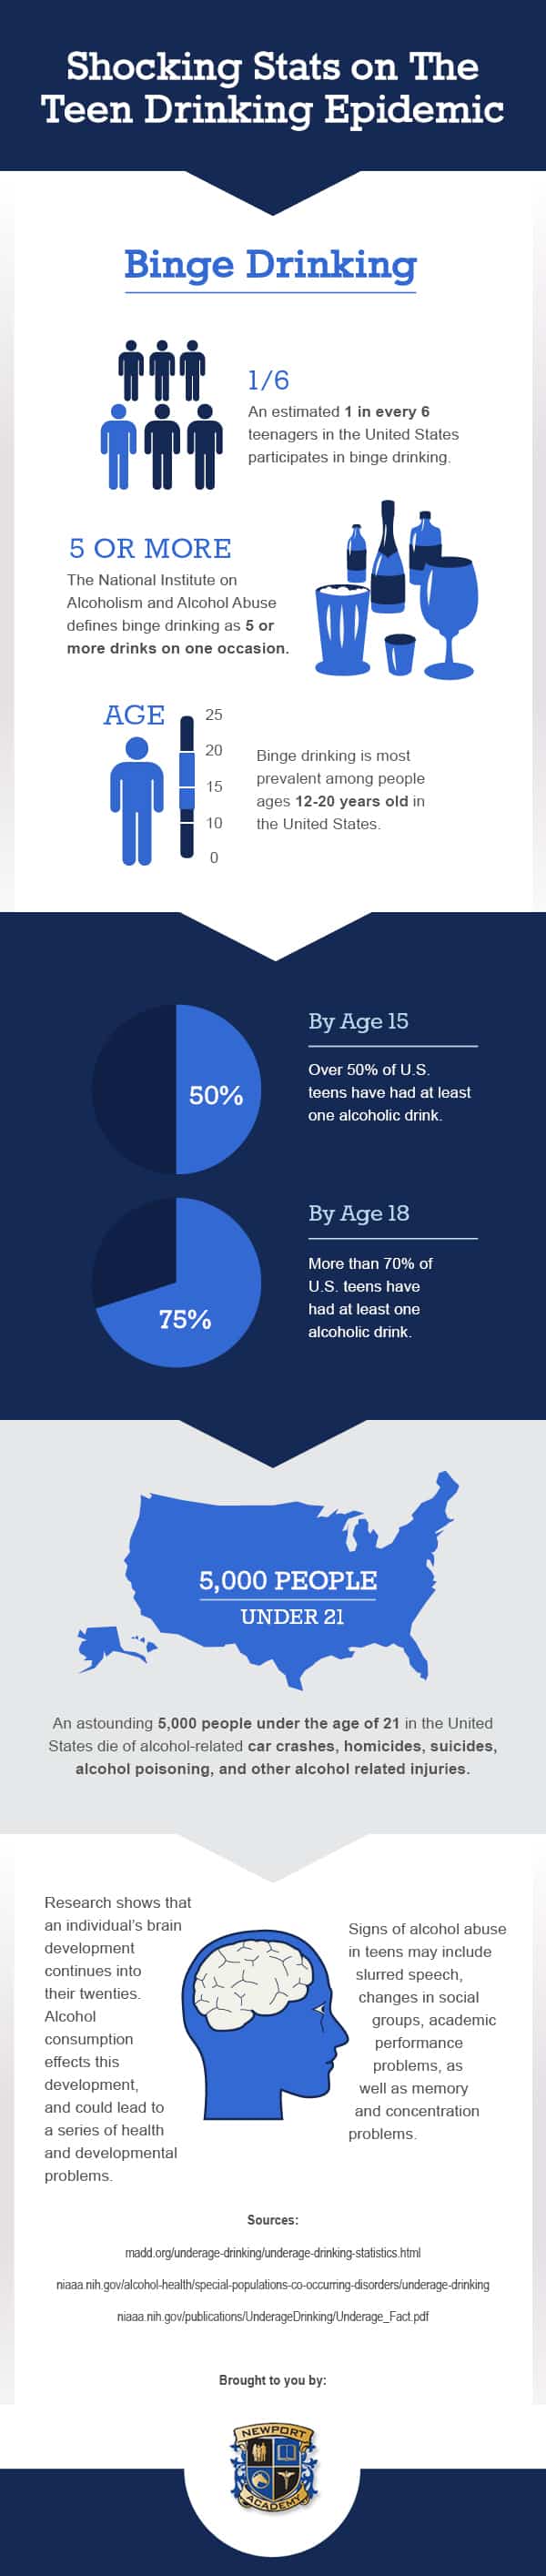 Infographic: Stats on Teen Drinking Epidemic